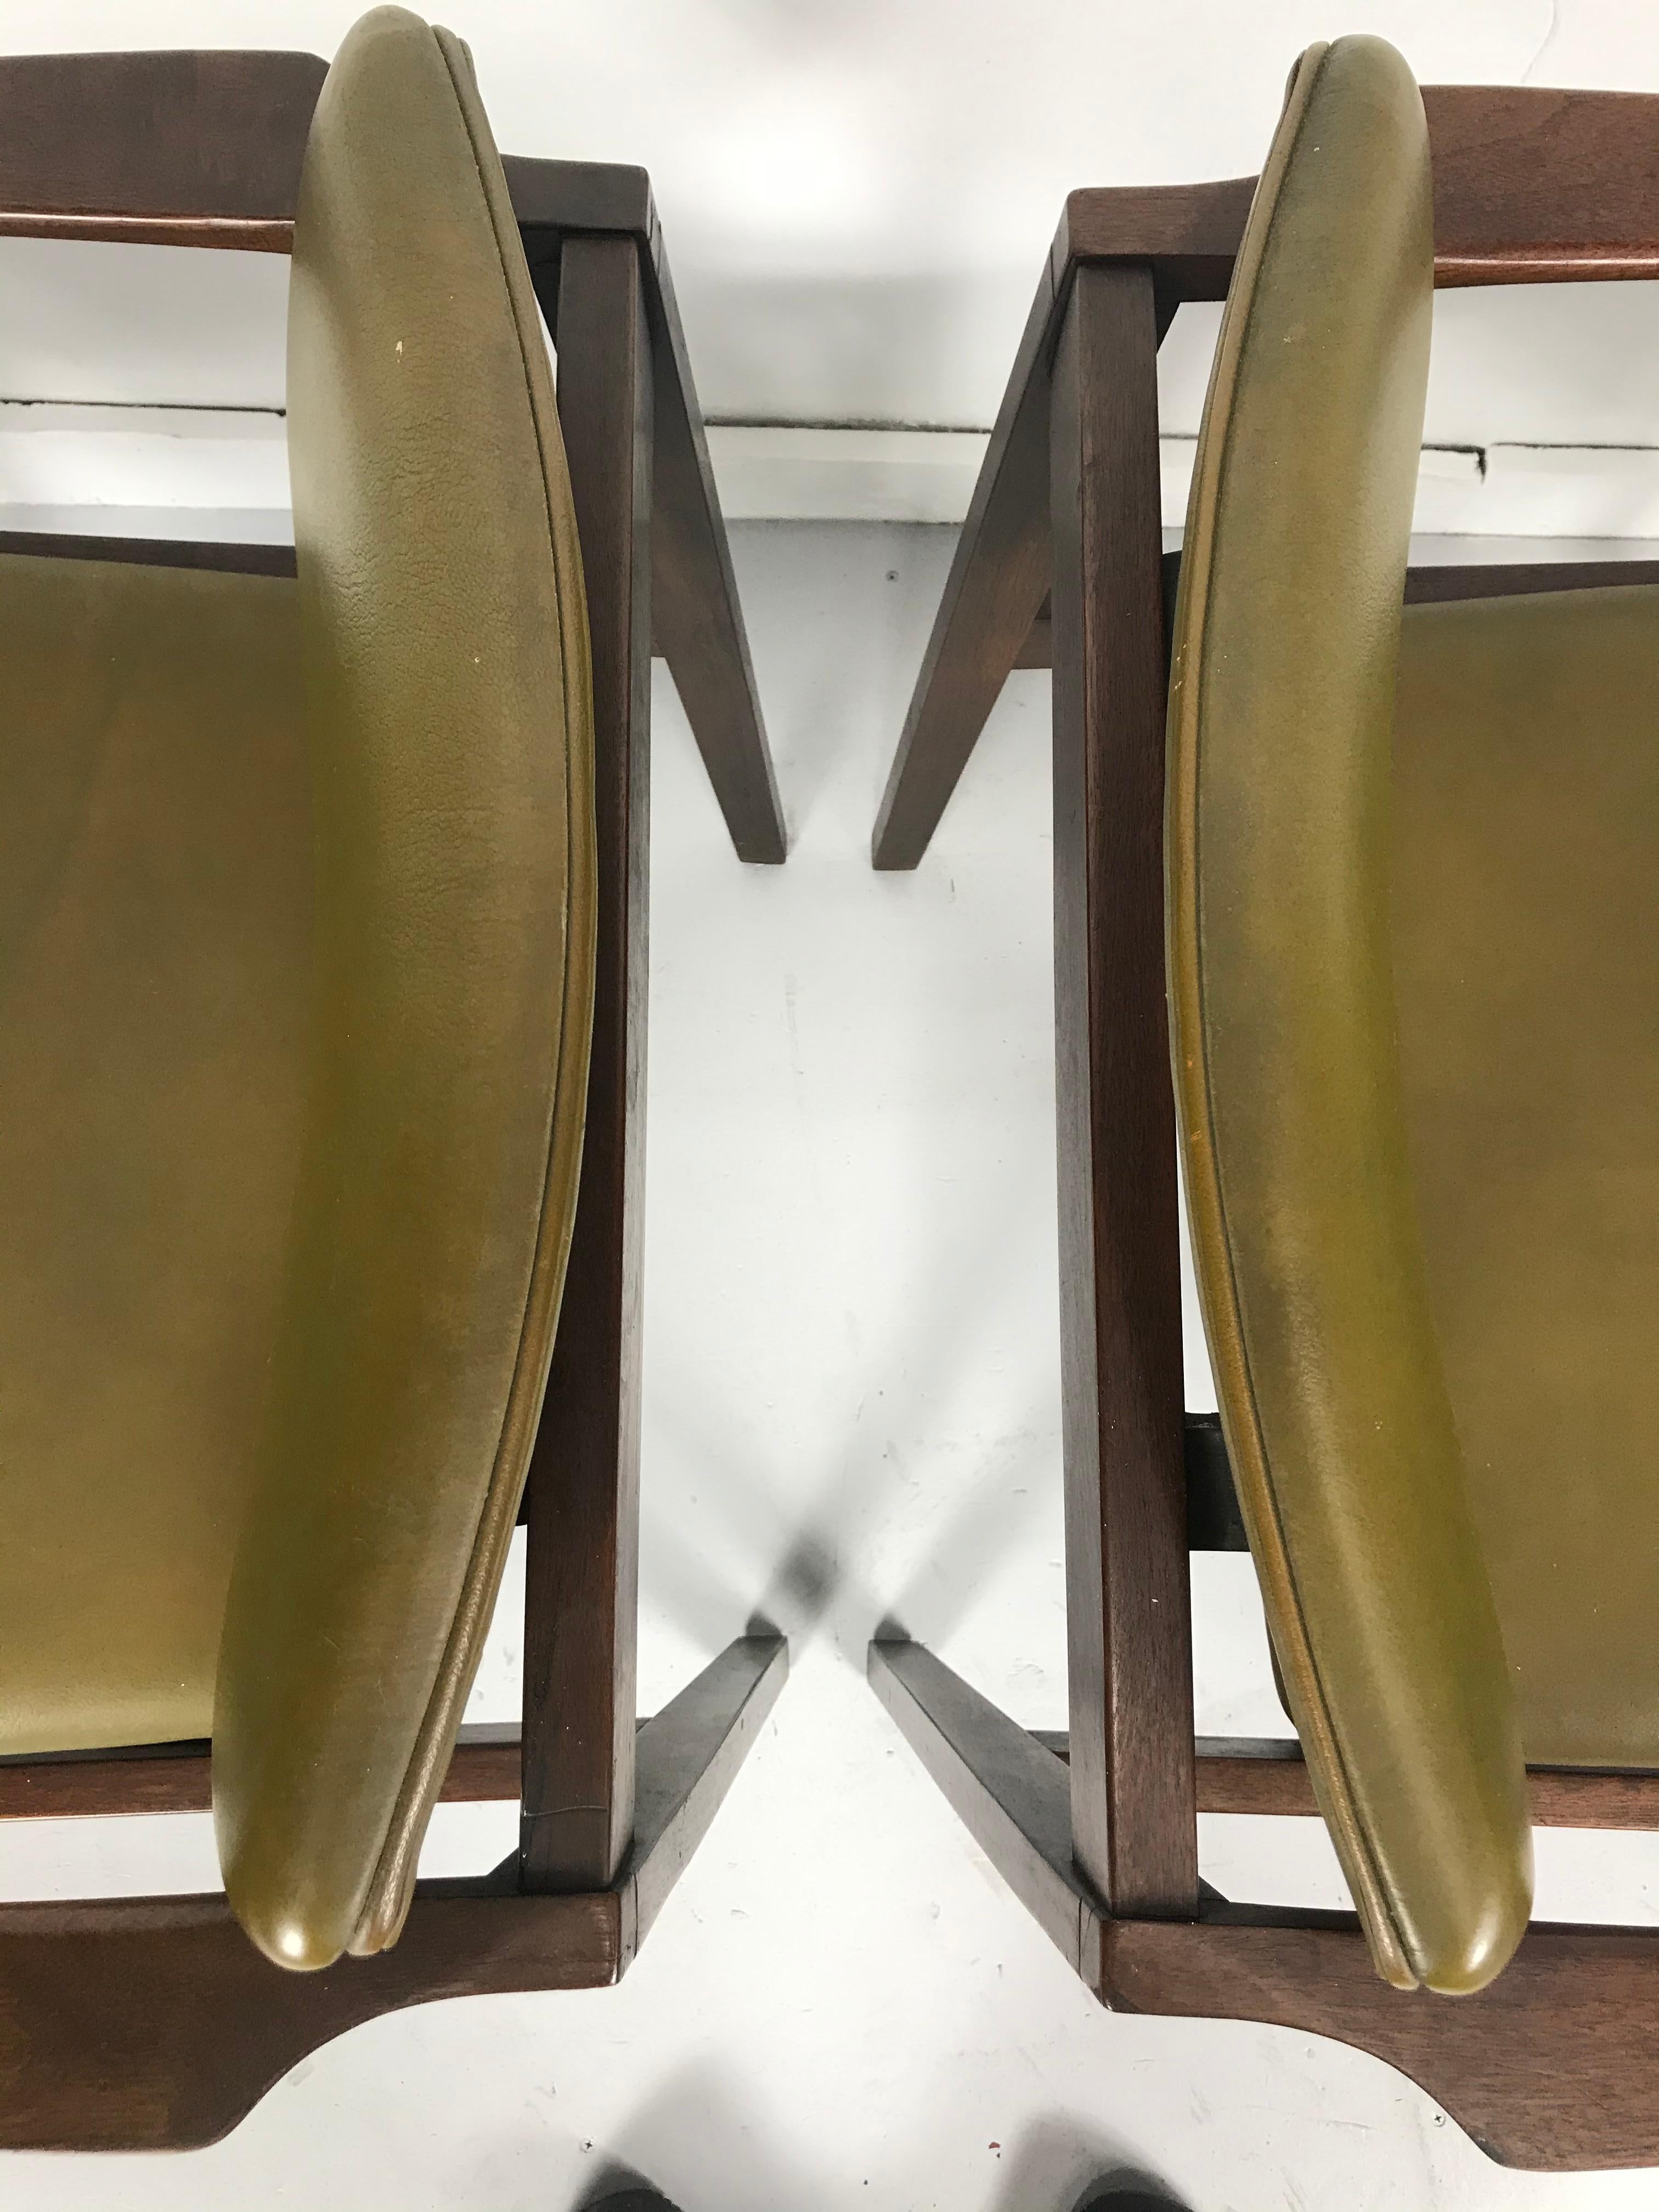 Stunning pair of Stow Davis sculpted walnut lounge chairs, Classic modernist design, extremely comfortable, retain original mustard green Naugahyde floating seat and back, also retains original Stow Davis metal label. Fit seamlessly into any